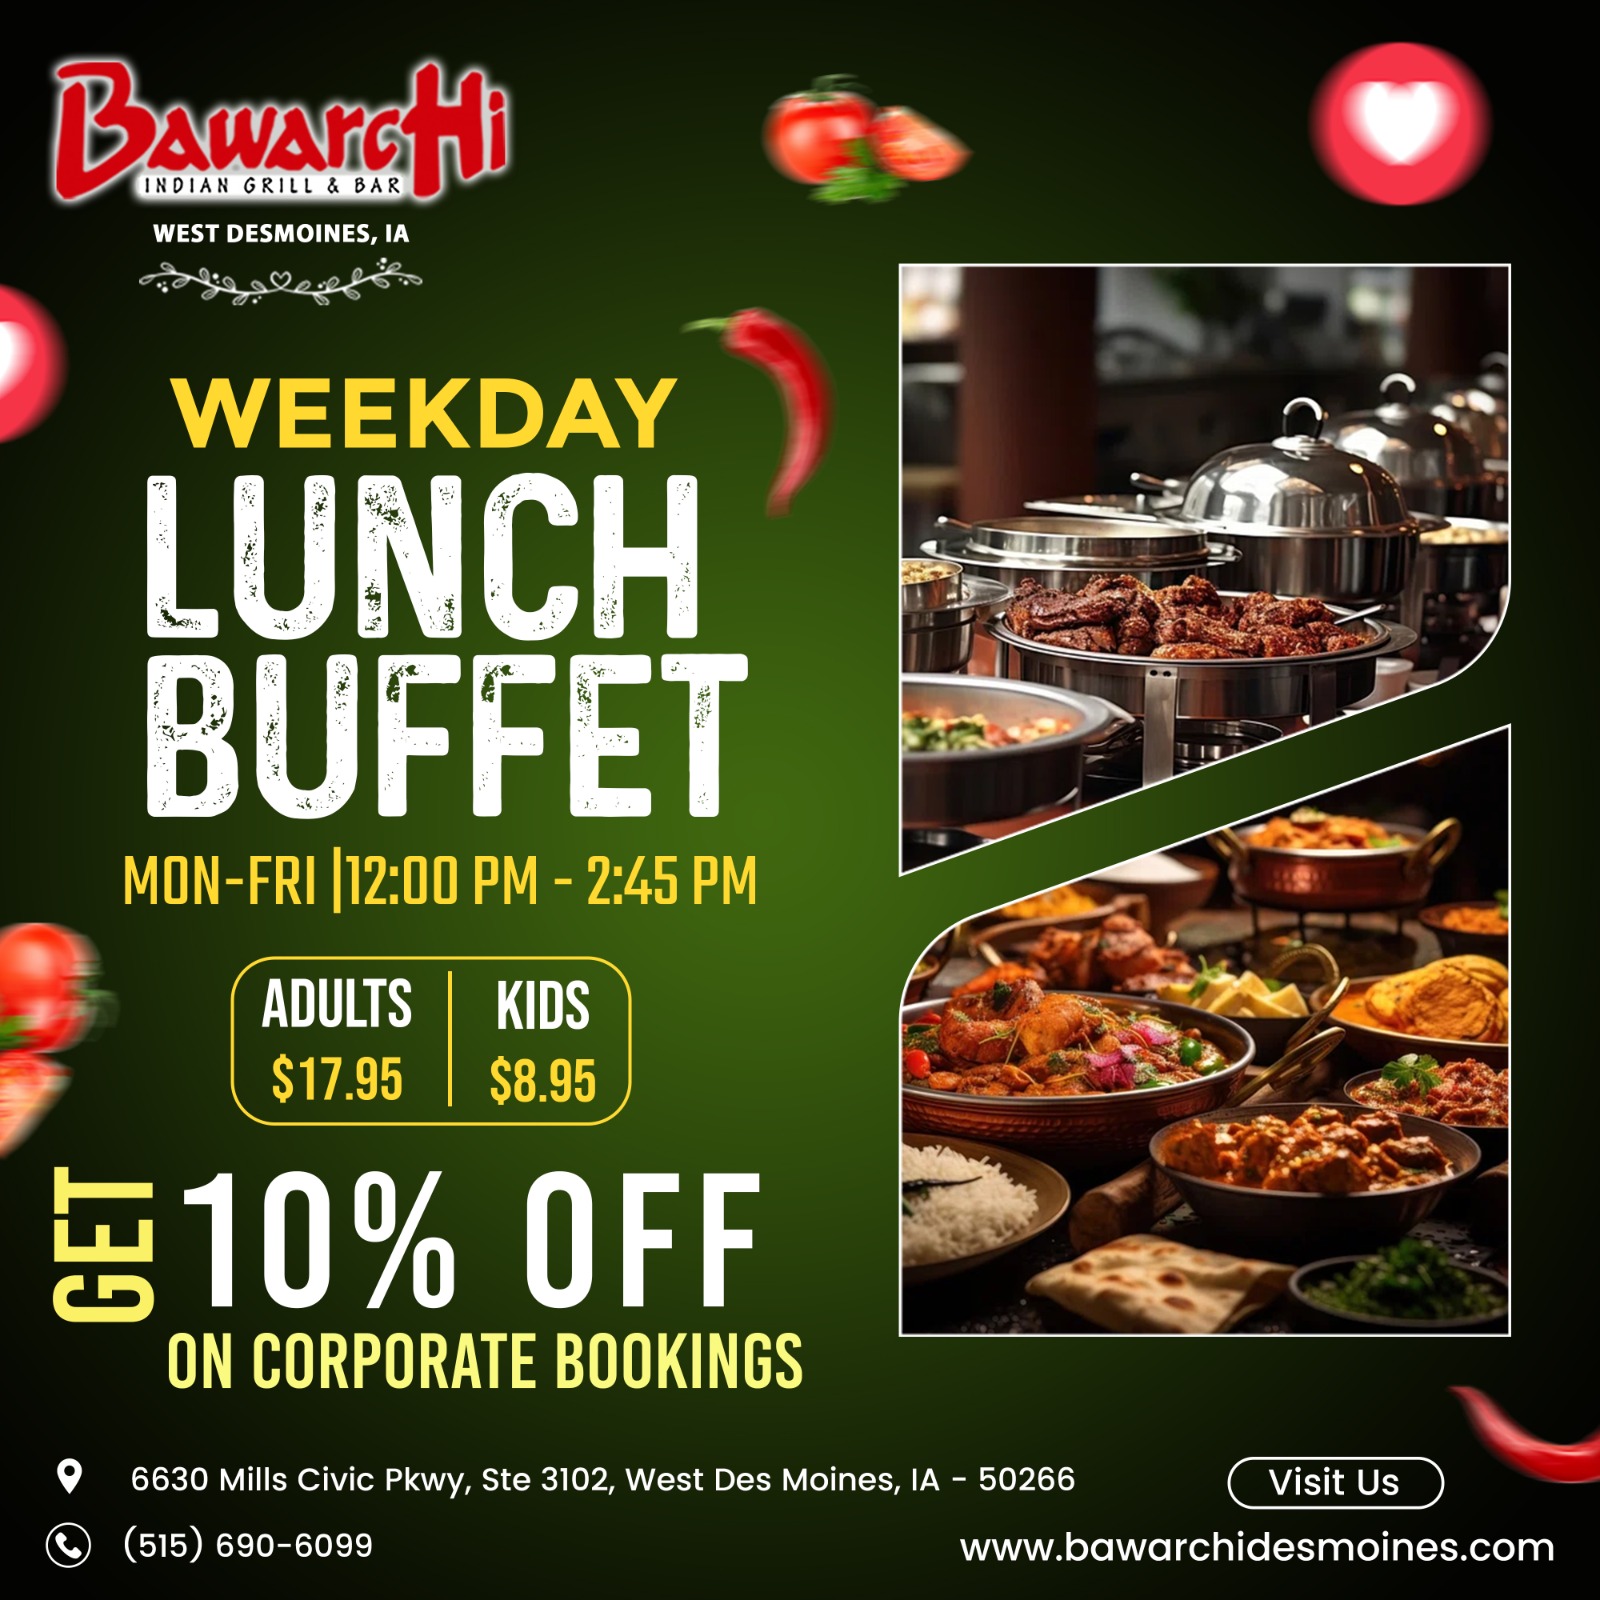  Elevate your weekdays with our delicious WEEKDAY LUNCH BUFFET! ???? Join us for a culinary journey from 12:00 PM - 2:45 PM, MON-FRI